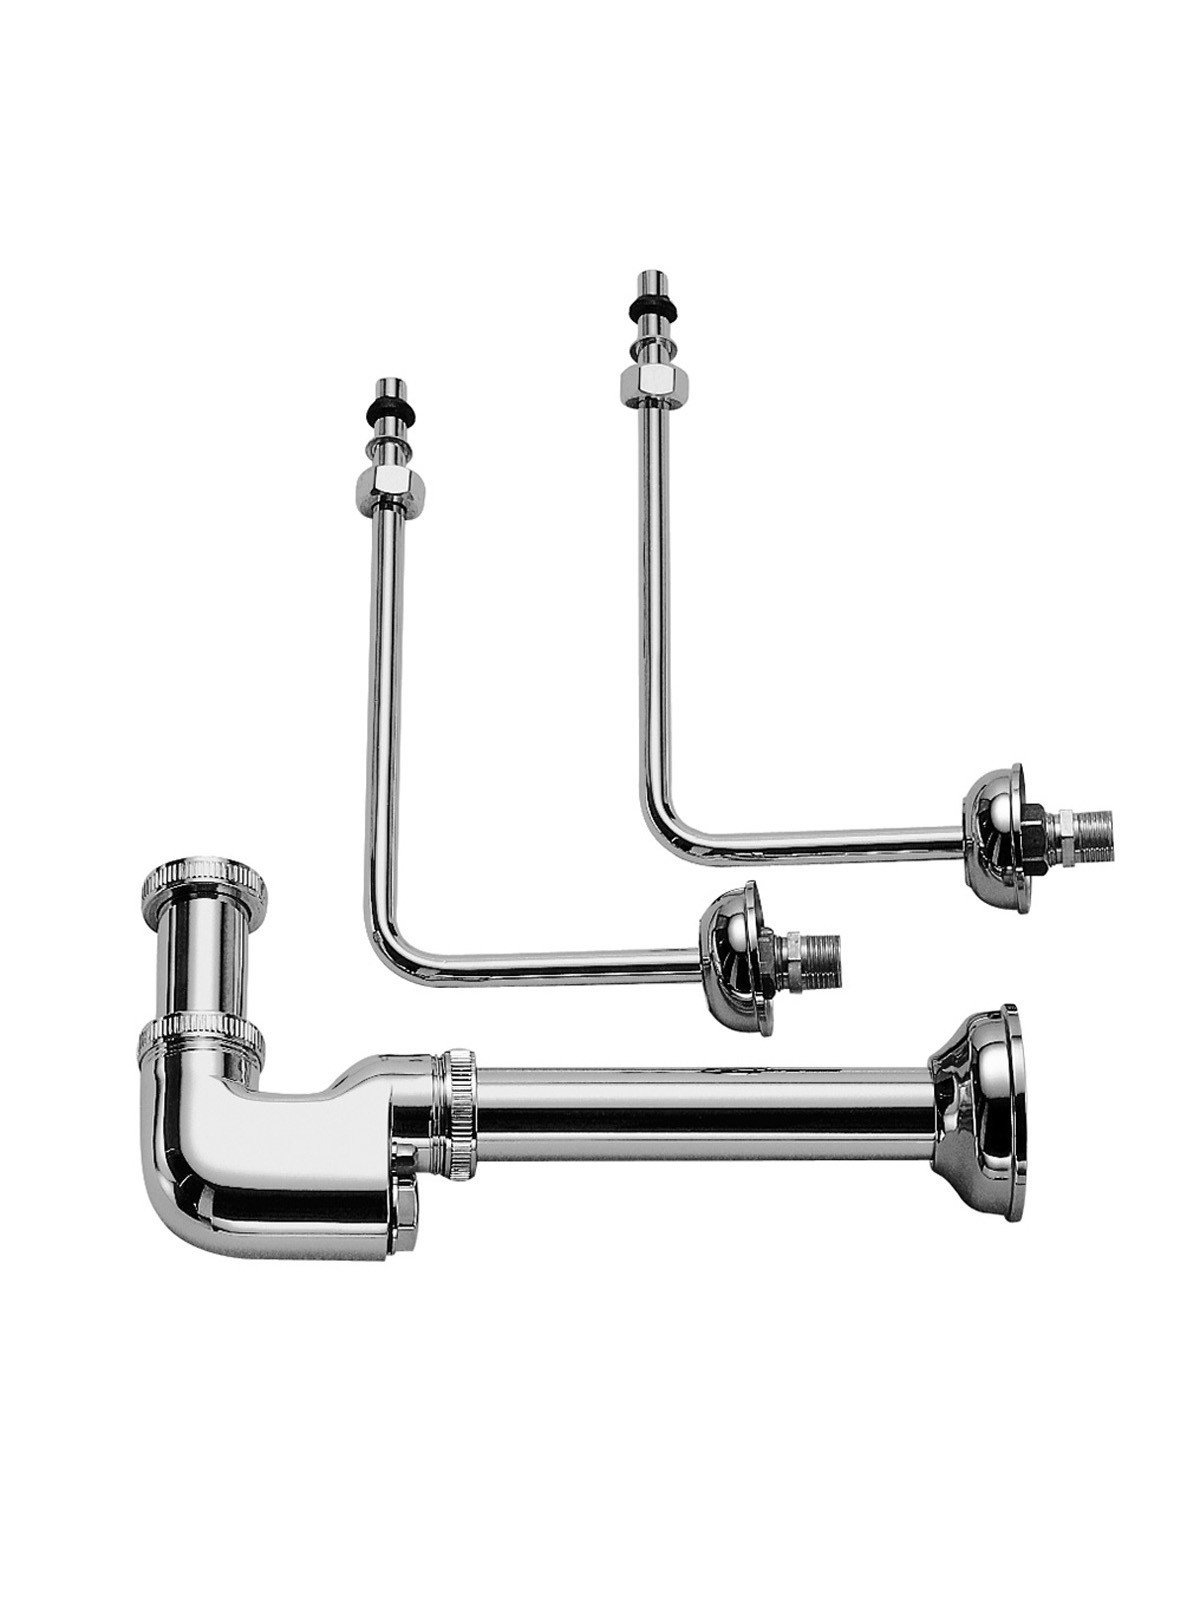 Connection kit with siphon,